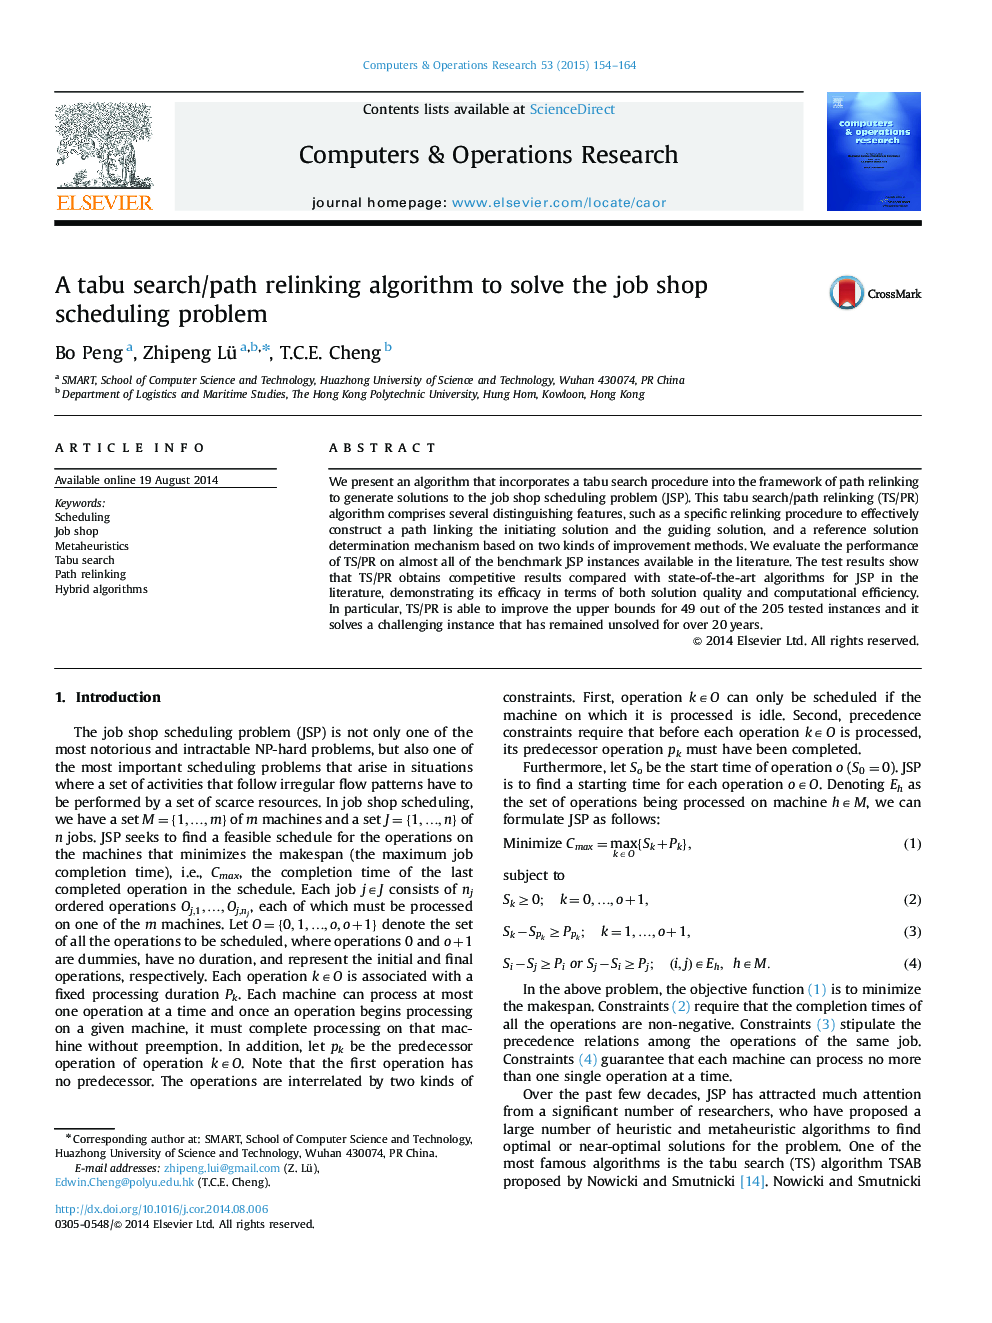 A tabu search/path relinking algorithm to solve the job shop scheduling problem